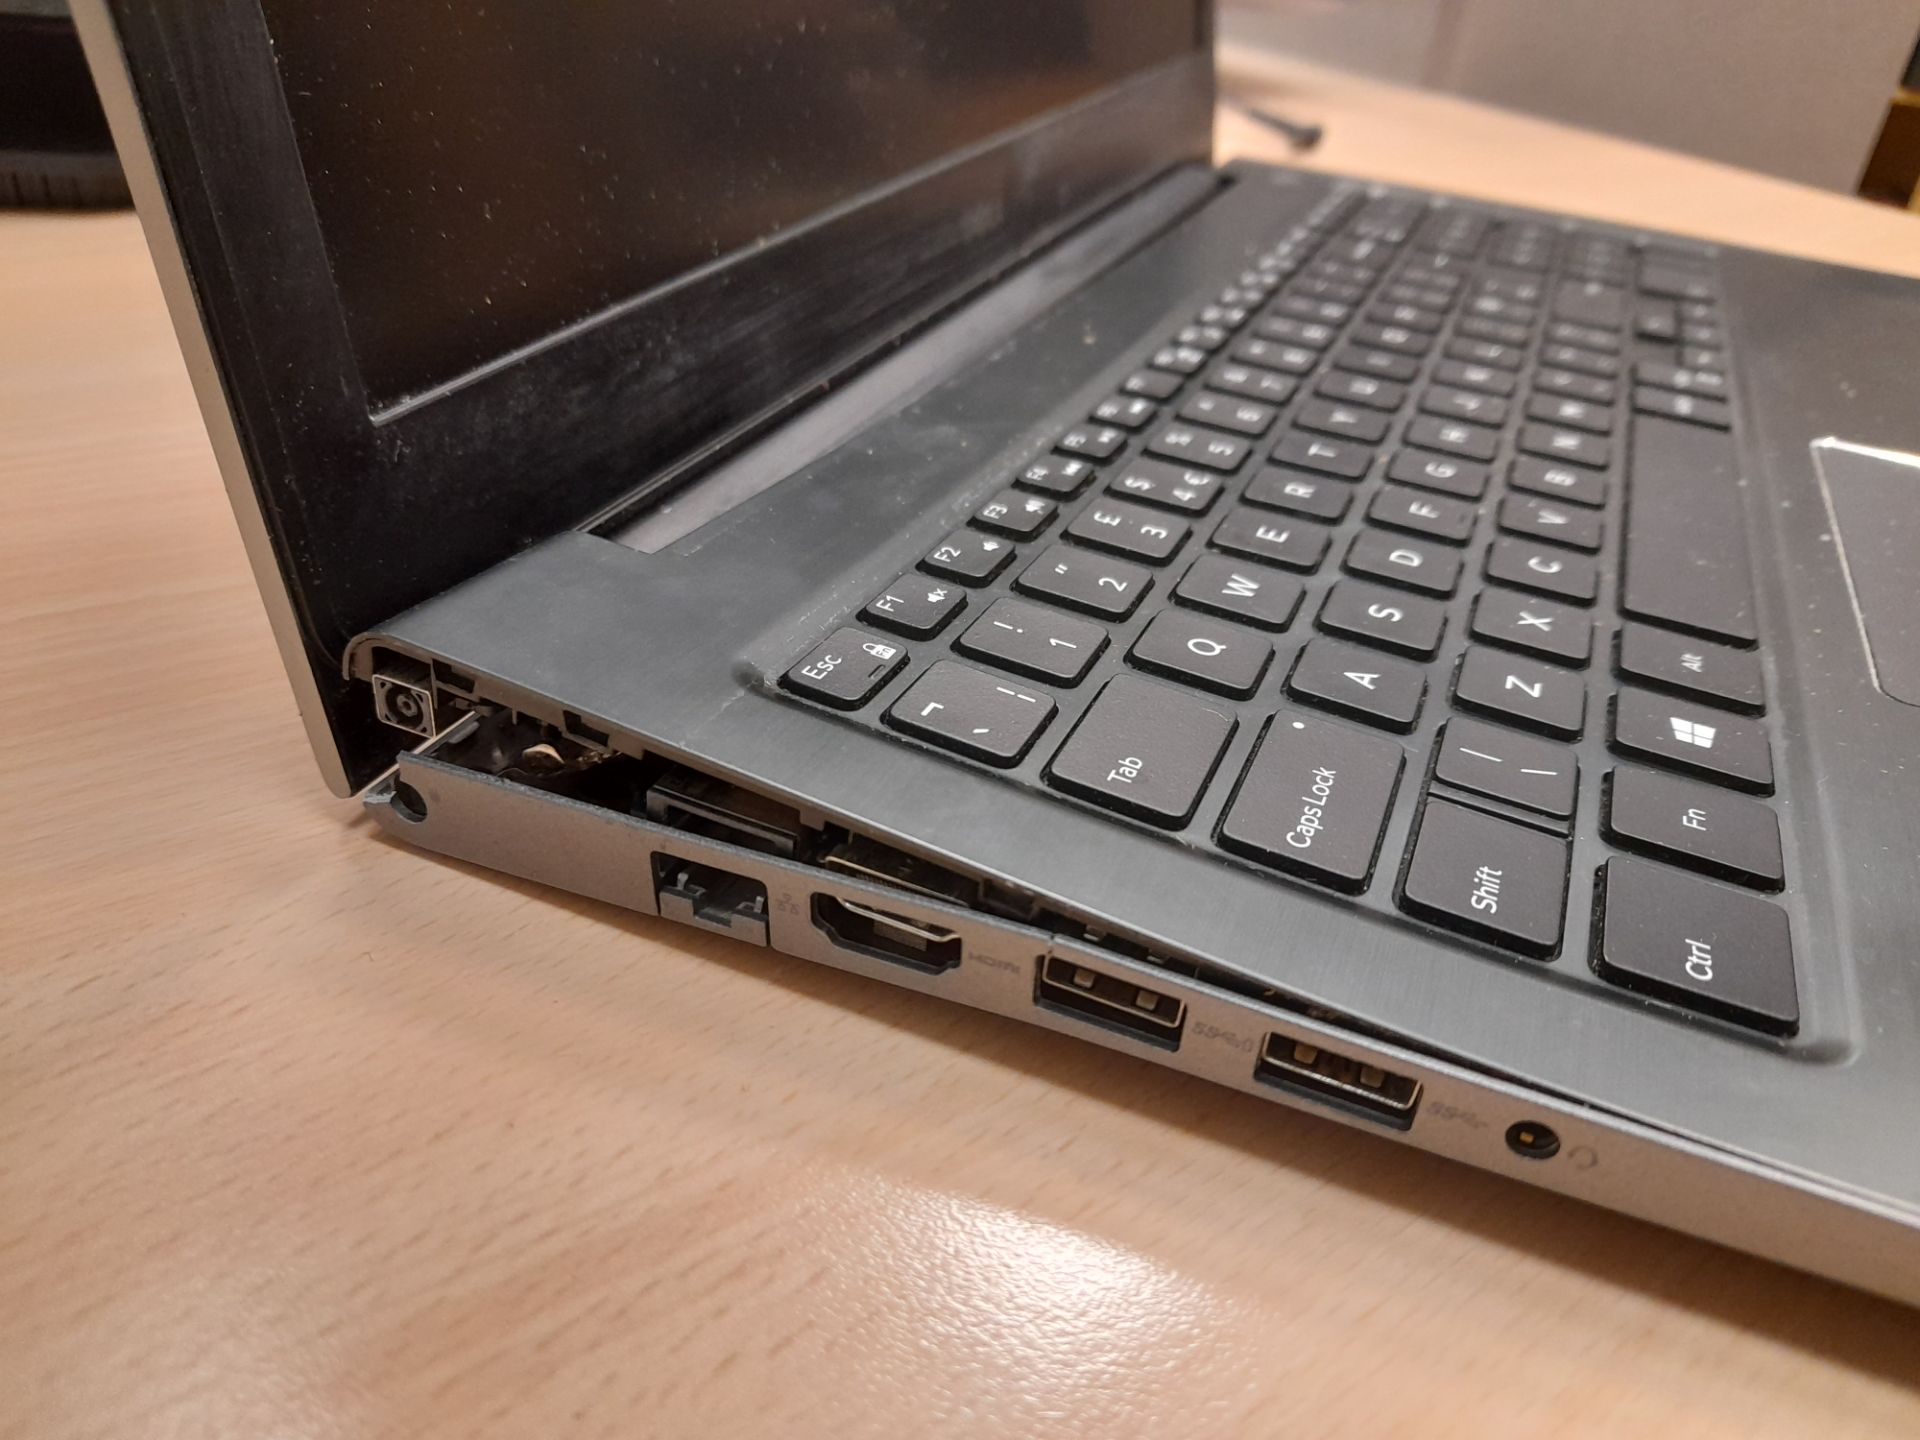 Dell Vostro laptop, with Intel Core i5 7th Gen, Serial Number: JM27142, Year: 2018. Damage to casing - Image 4 of 4